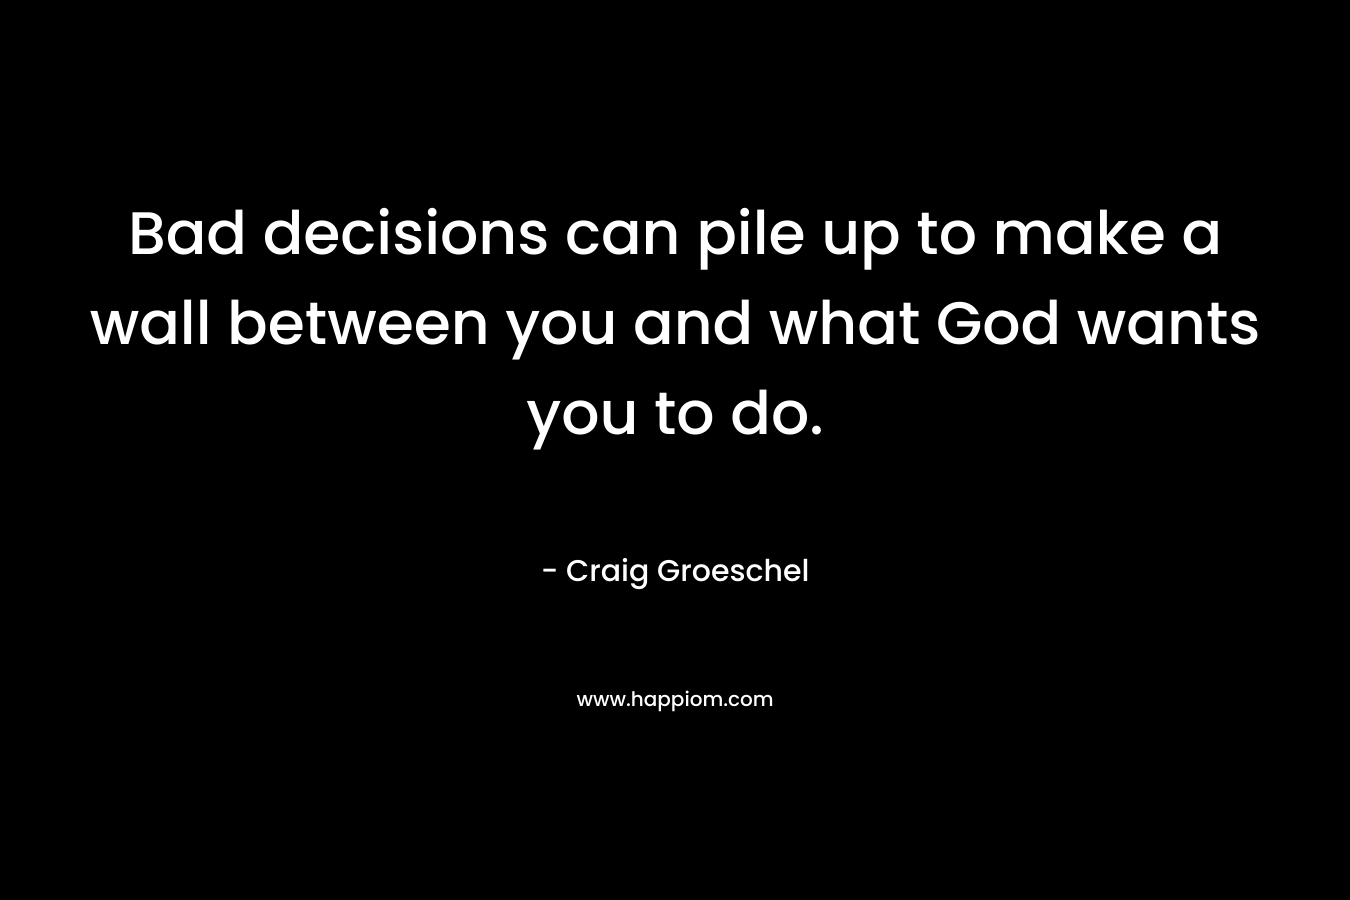 Bad decisions can pile up to make a wall between you and what God wants you to do. – Craig Groeschel